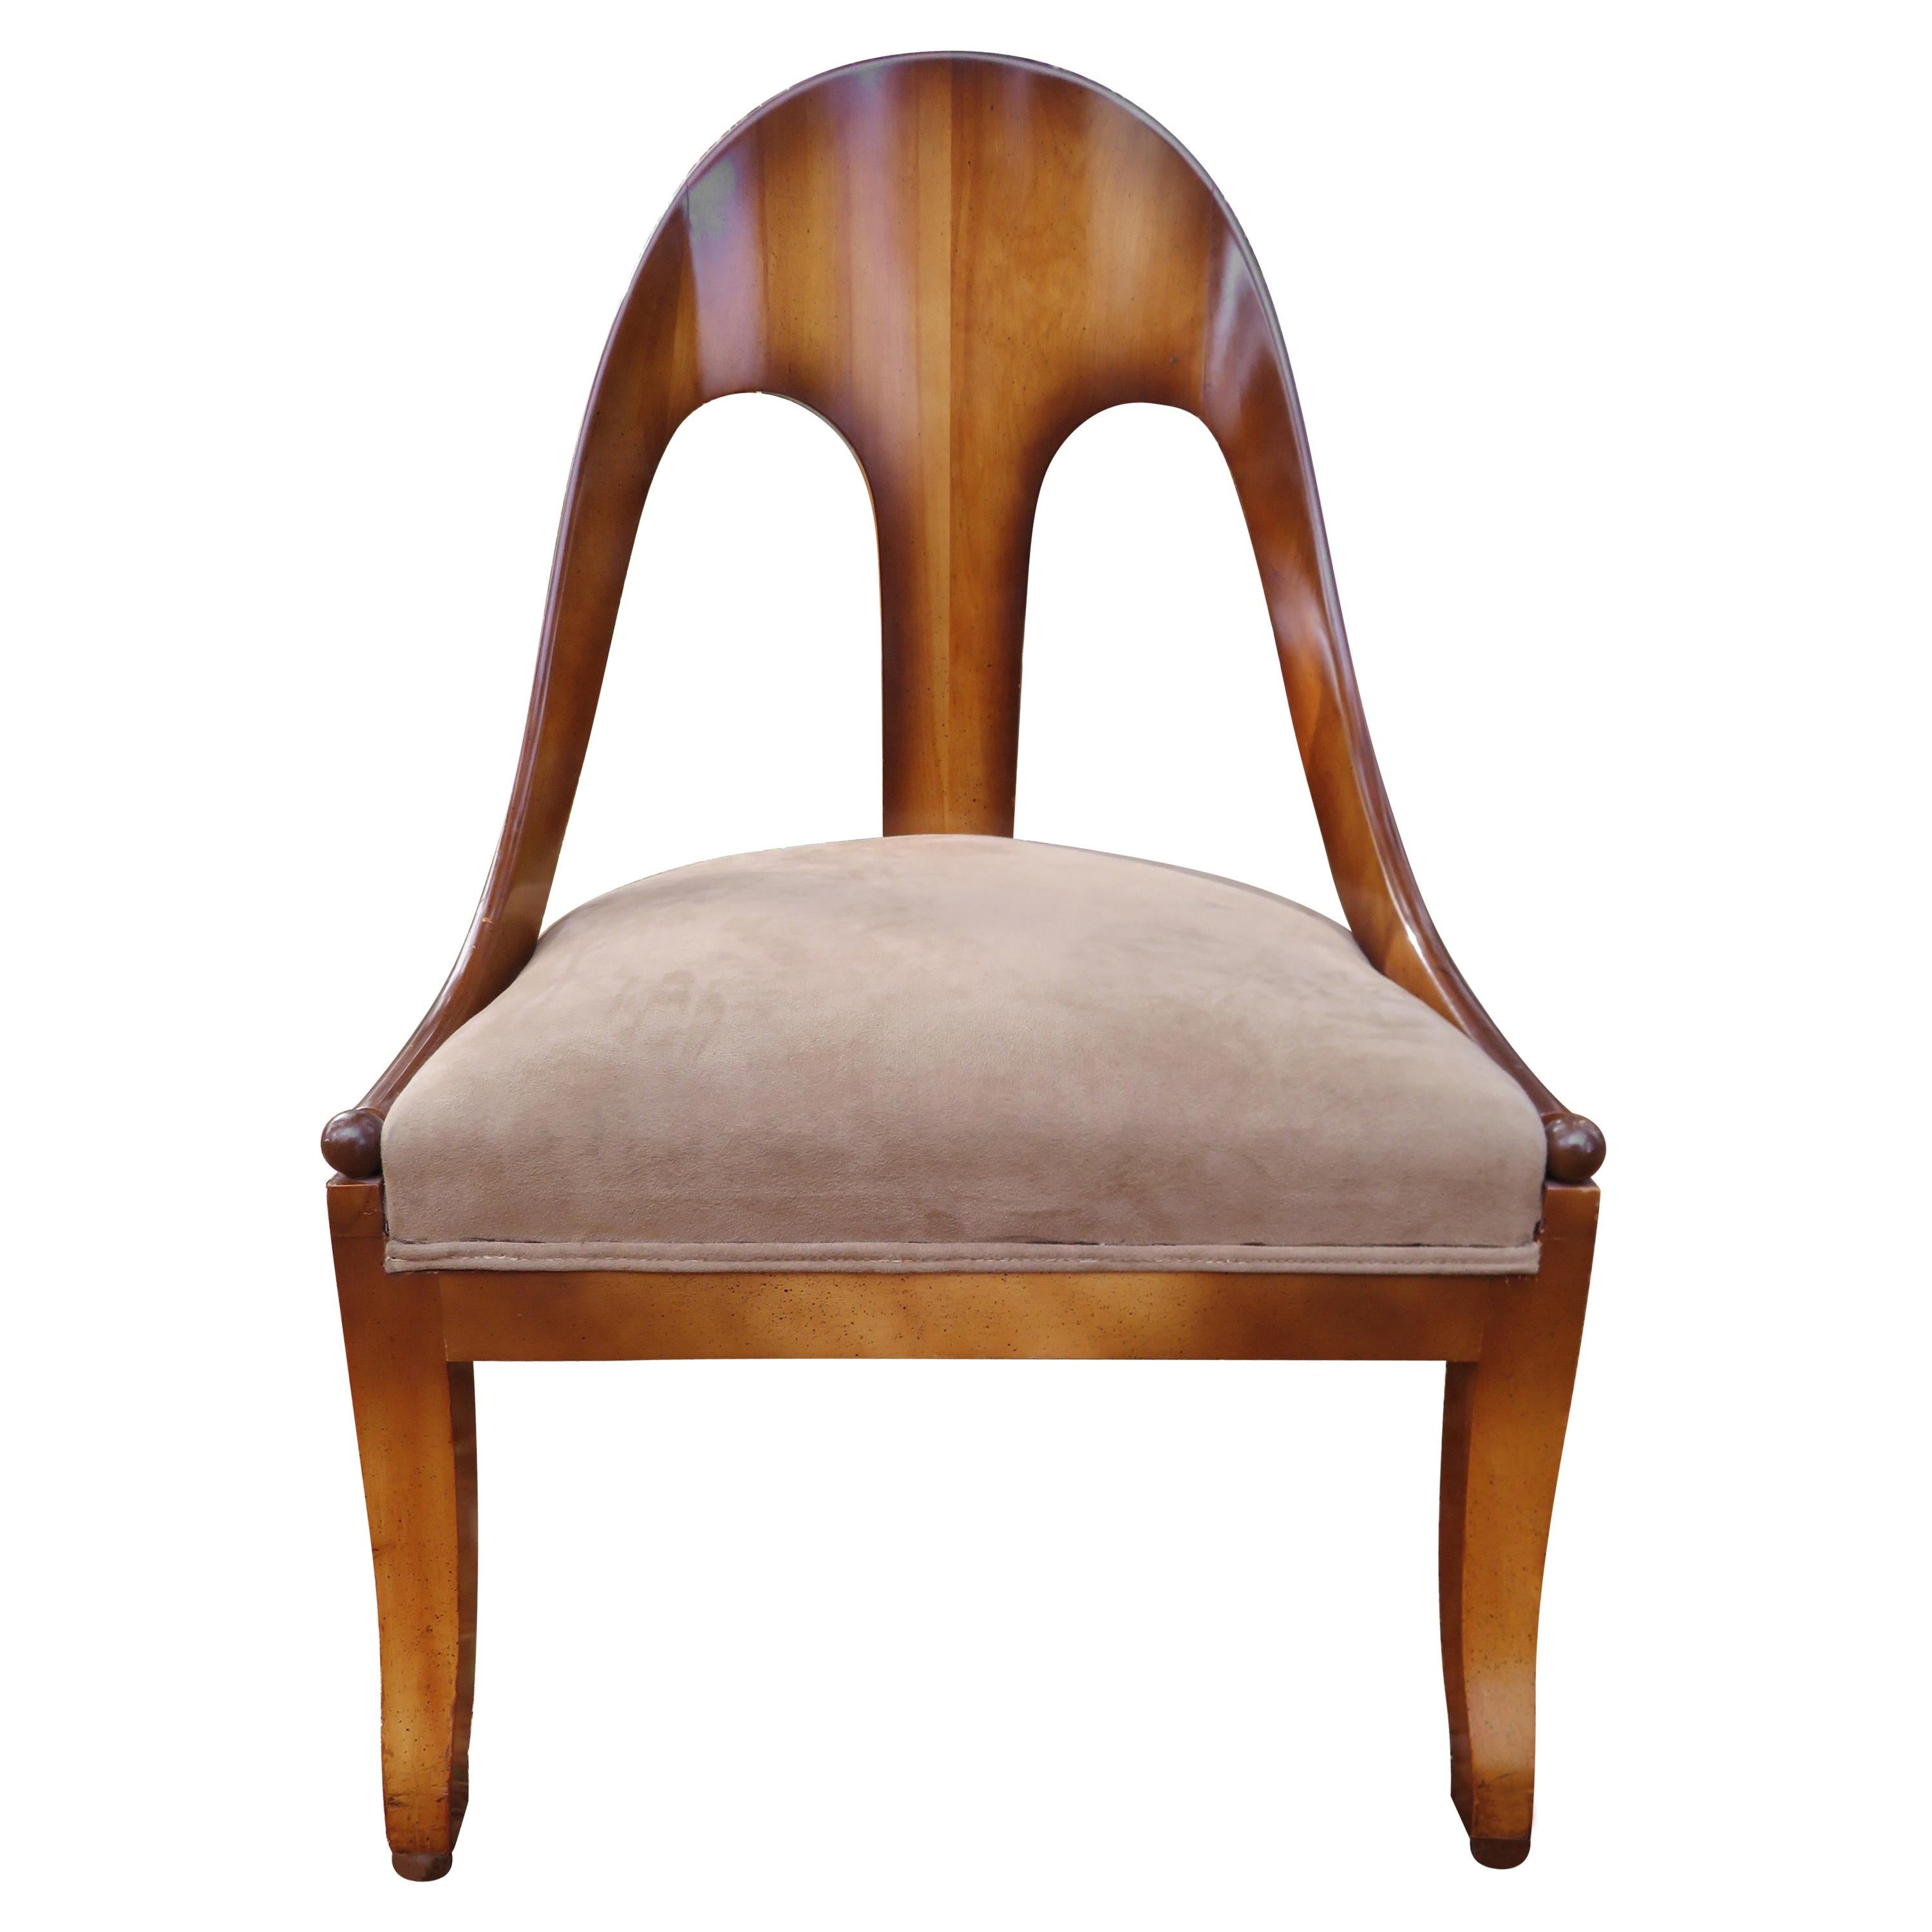 Wonderful Michael Taylor for Baker Spoon Back Neoclassical Chair, Midcentury